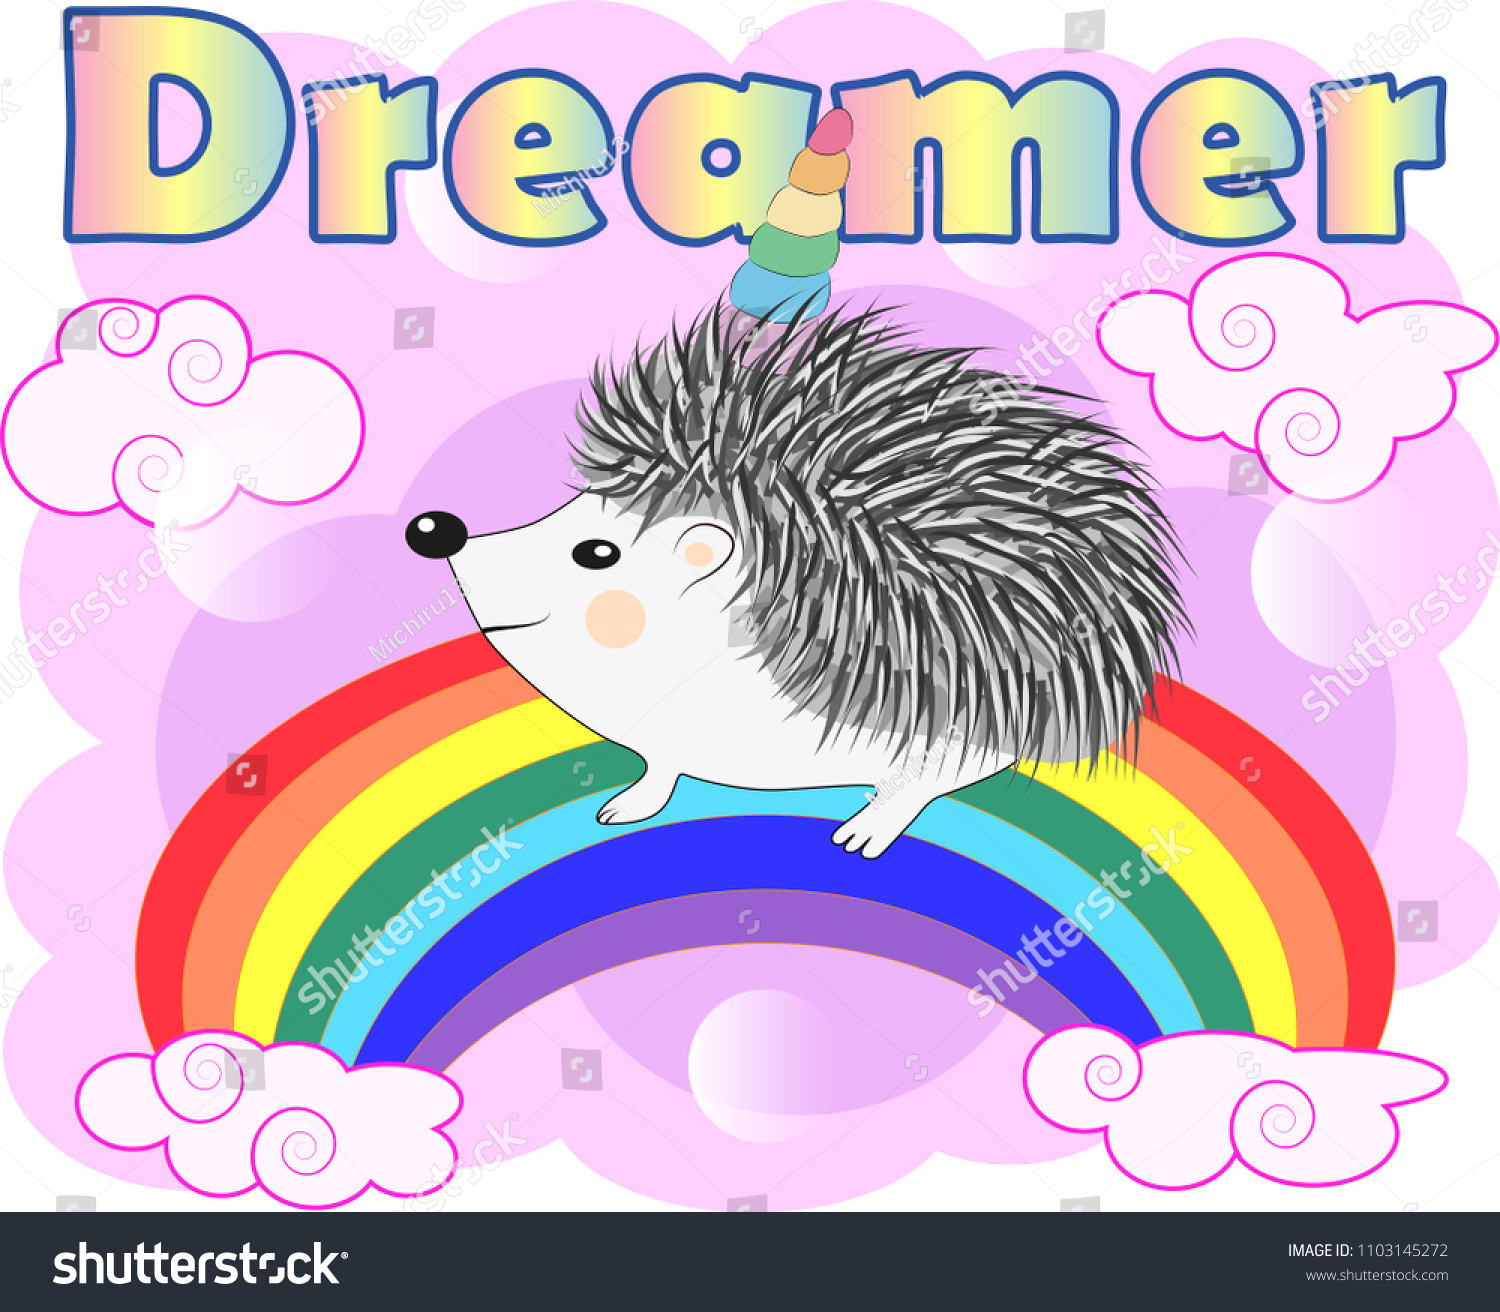 Rainbow,Hedgehogs Unicorn Cats and Otters